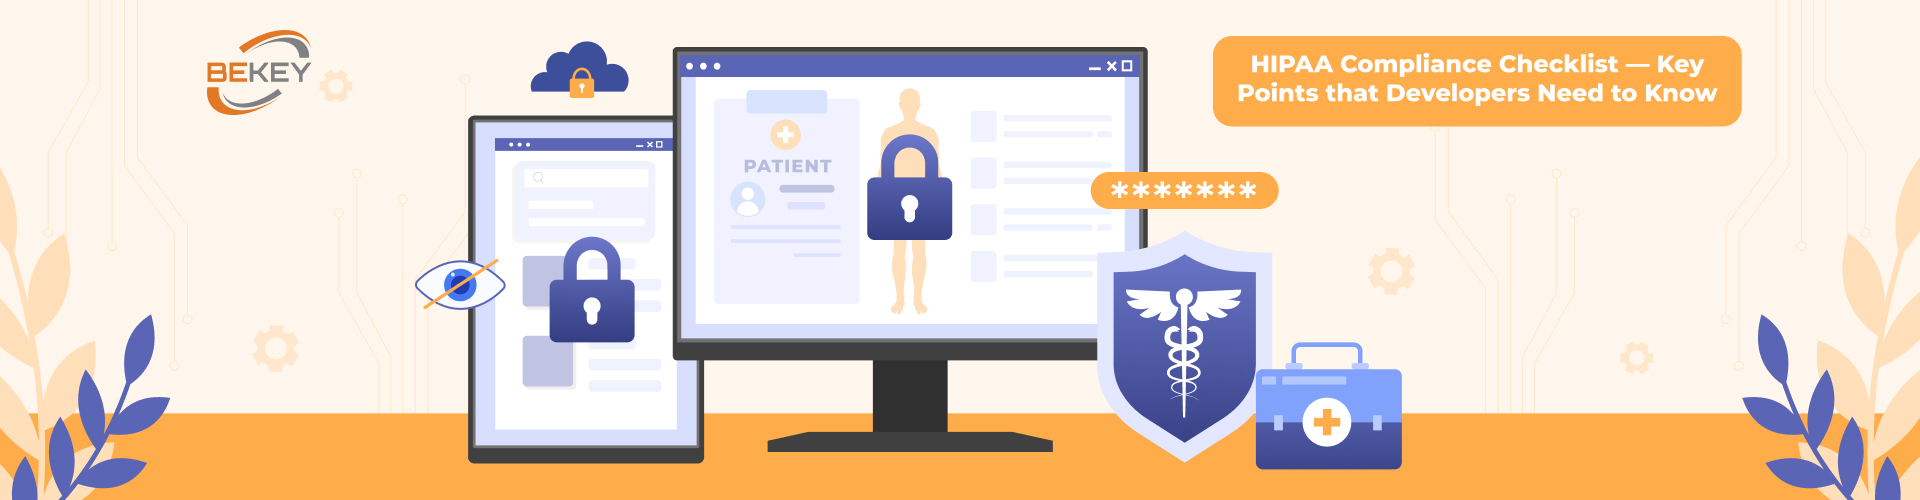 HIPAA Compliance Checklist — Key Points that Developers Need to Know - image